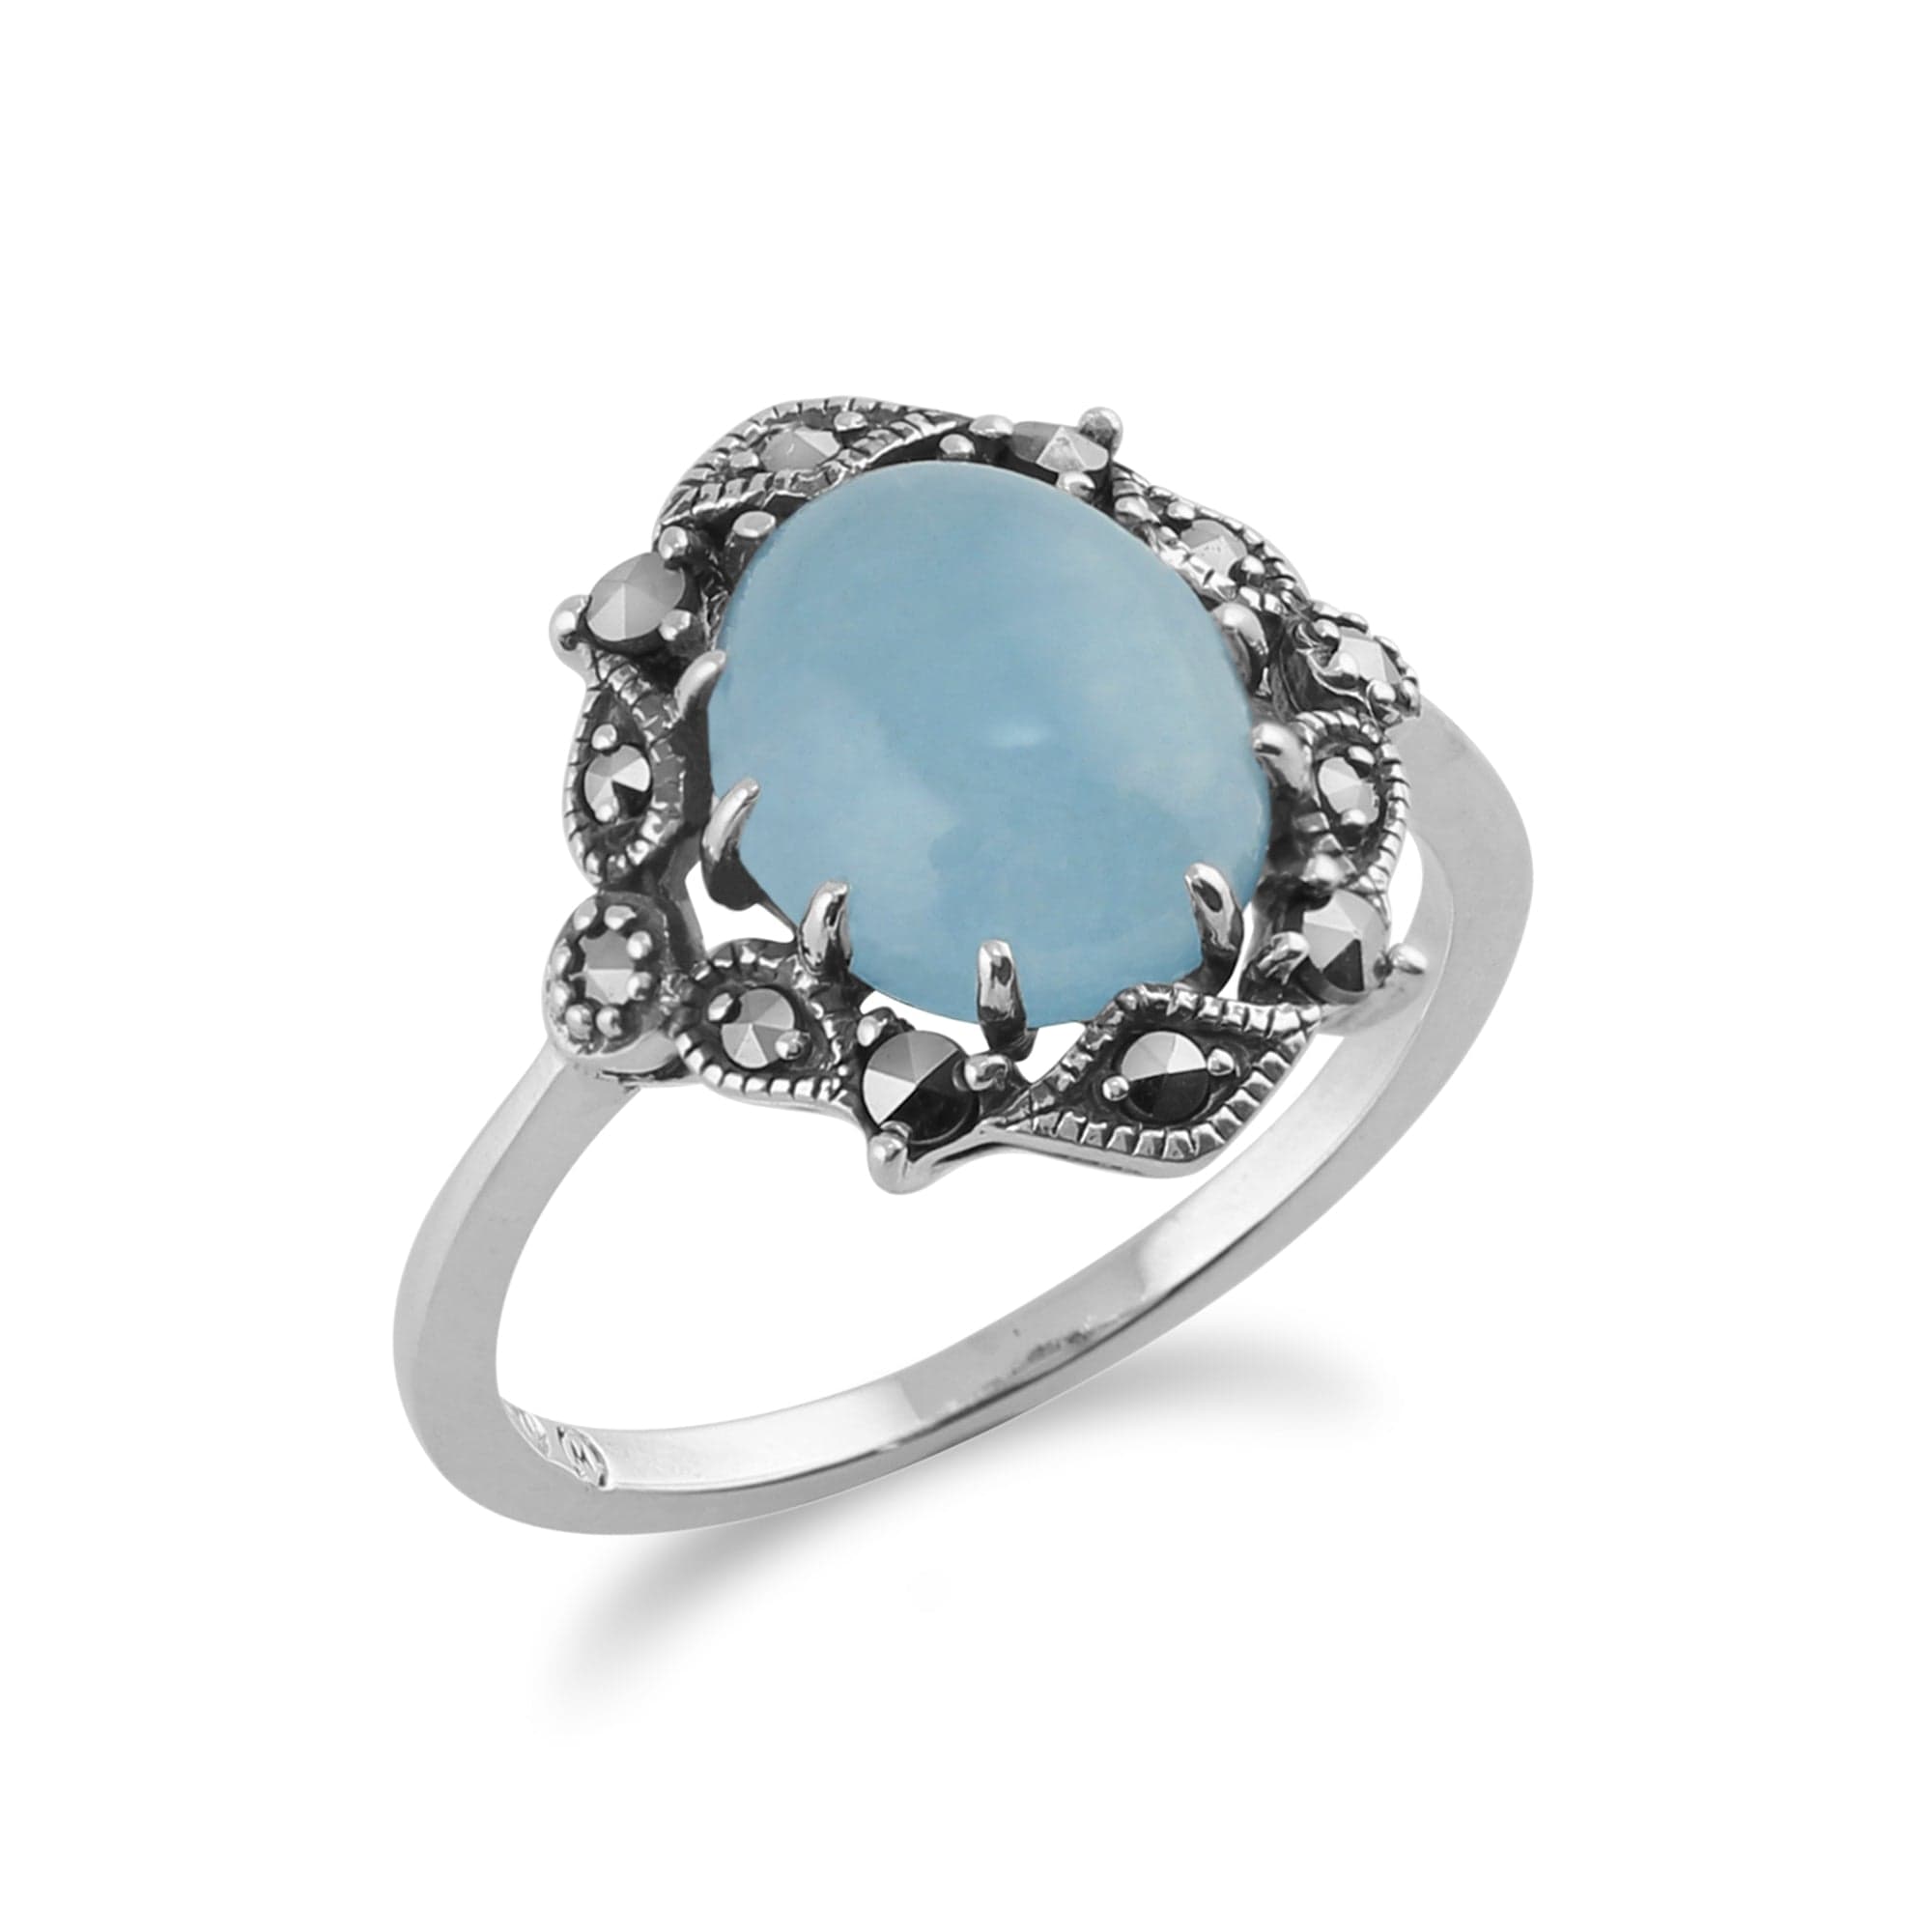 214R480009925 Art Nouveau Style Oval Blue Jade Cabochon & Marcasite Statement Ring in 925 Sterling Silver 2